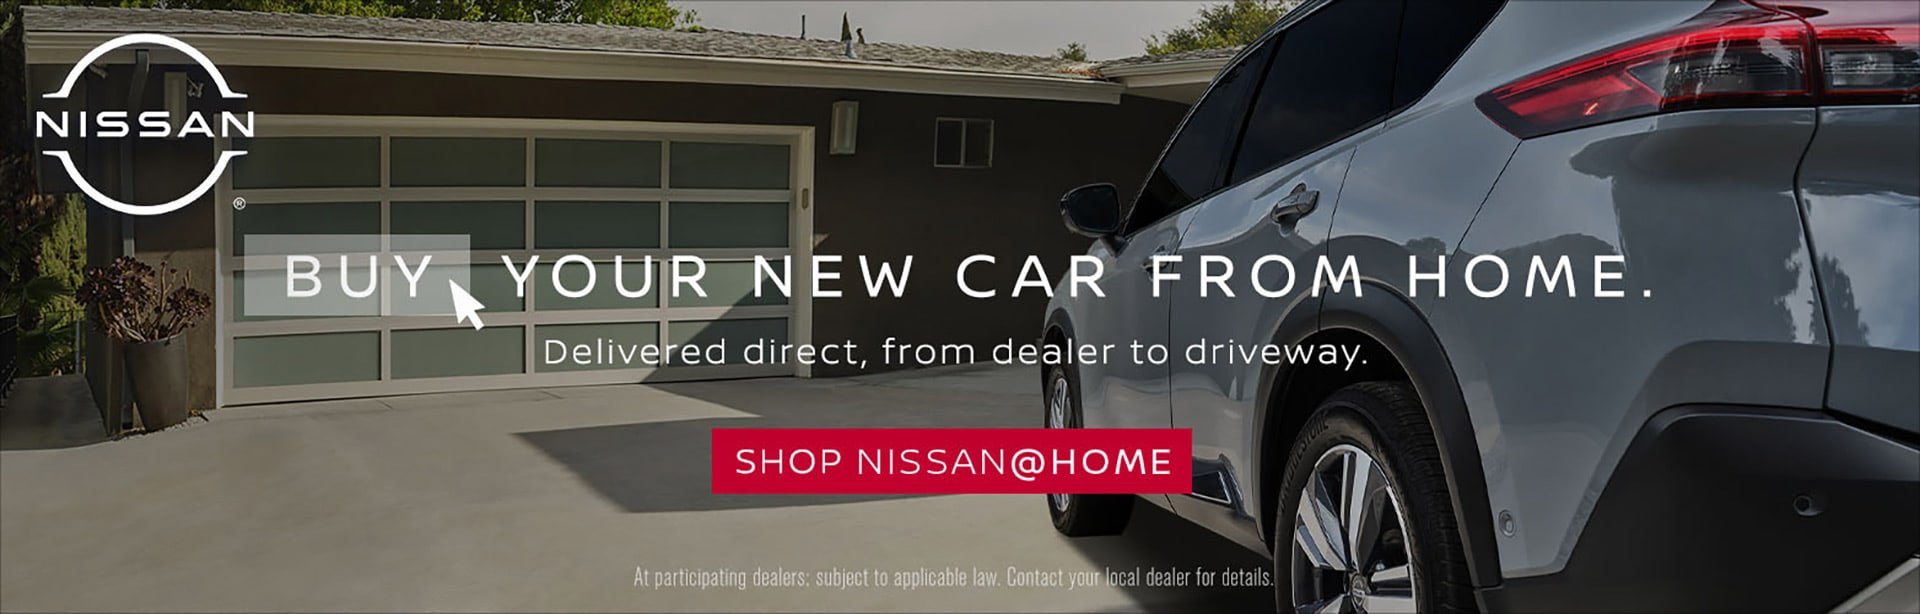 Buy your new car from home